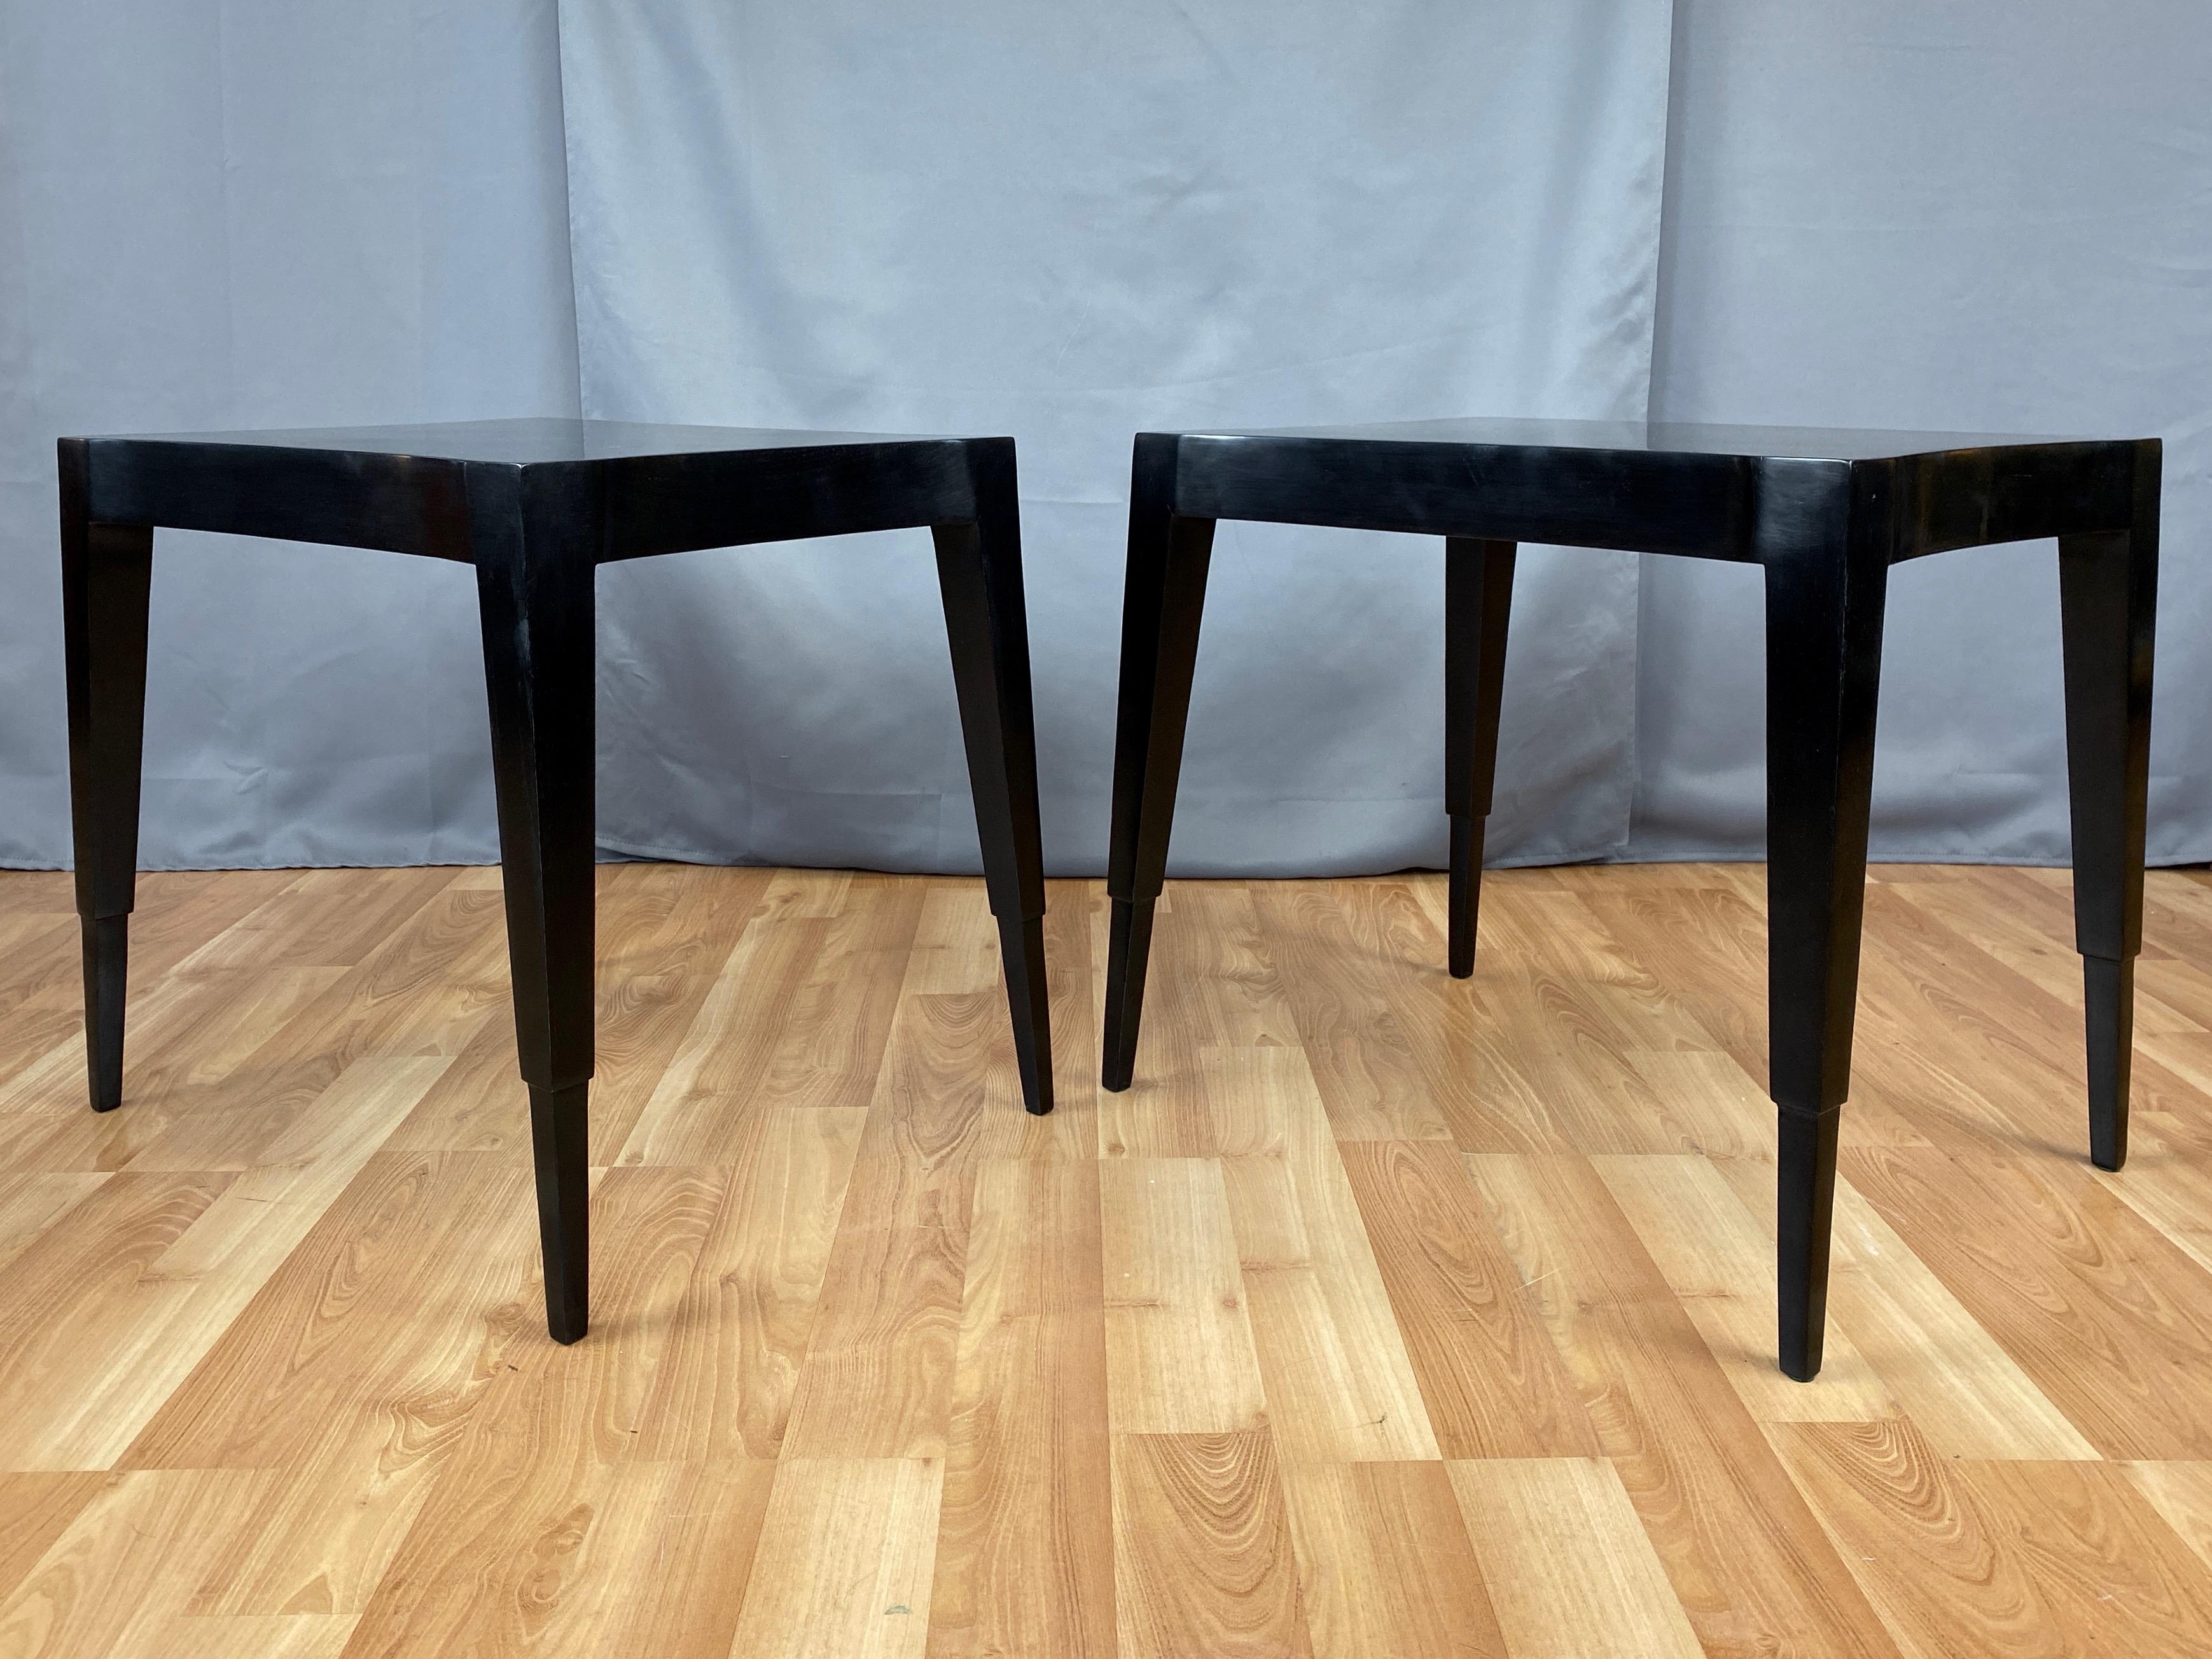 An uncommon pair of sublime mid-1940s Hollywood Regency model 3084 black lacquered mahogany side or end tables by Johan Tapp.

Impeccable proportions, lithe lines, and canted stance combine to exhibit an understated yet eye-catchingly confident